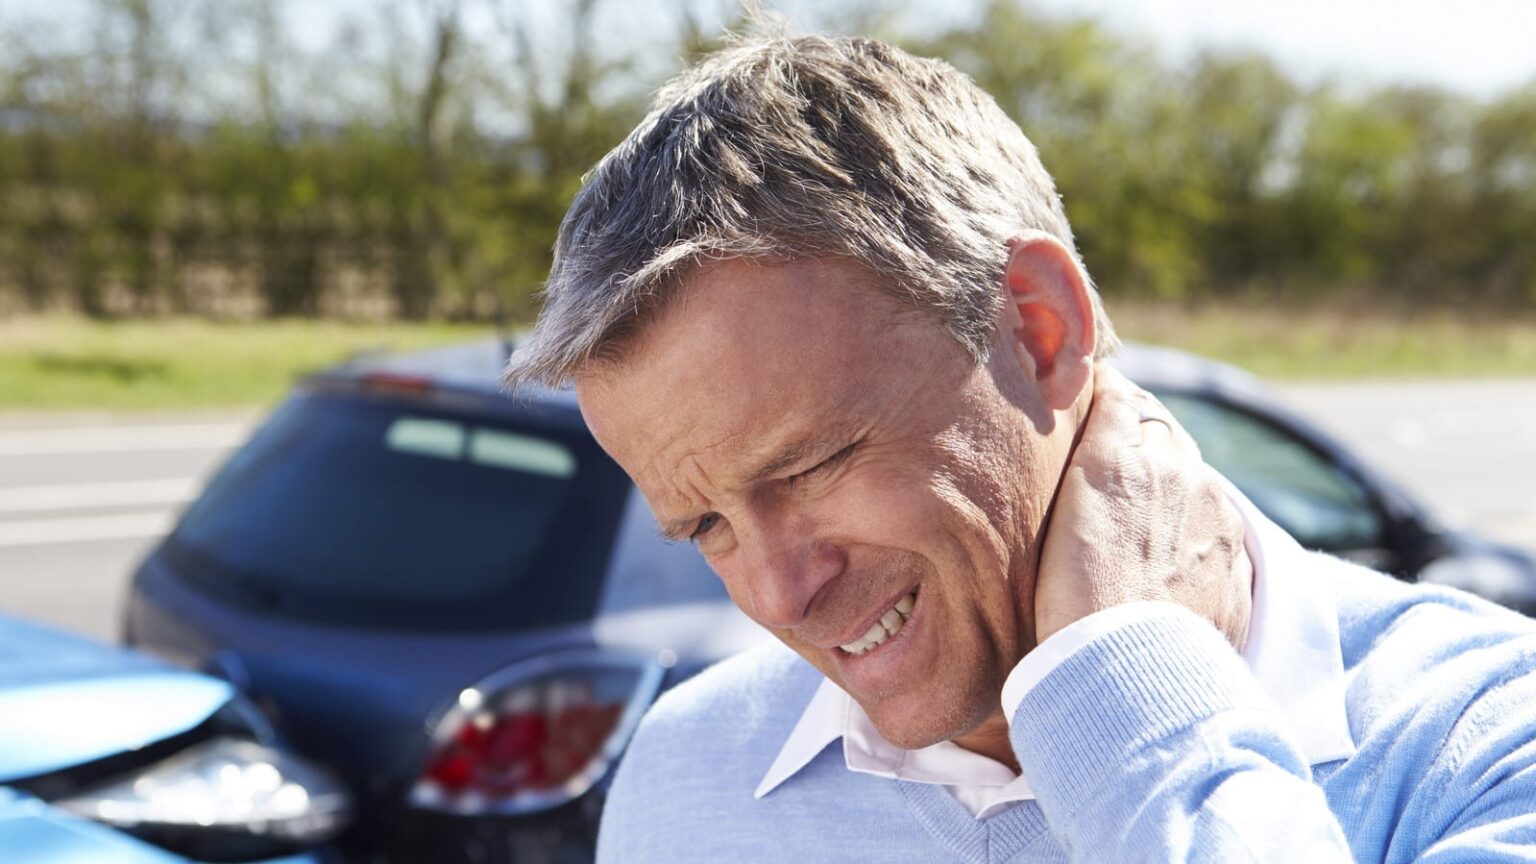 Auto accidents can be a serious occurrence. Here are some steps to take when you get into an auto accident.